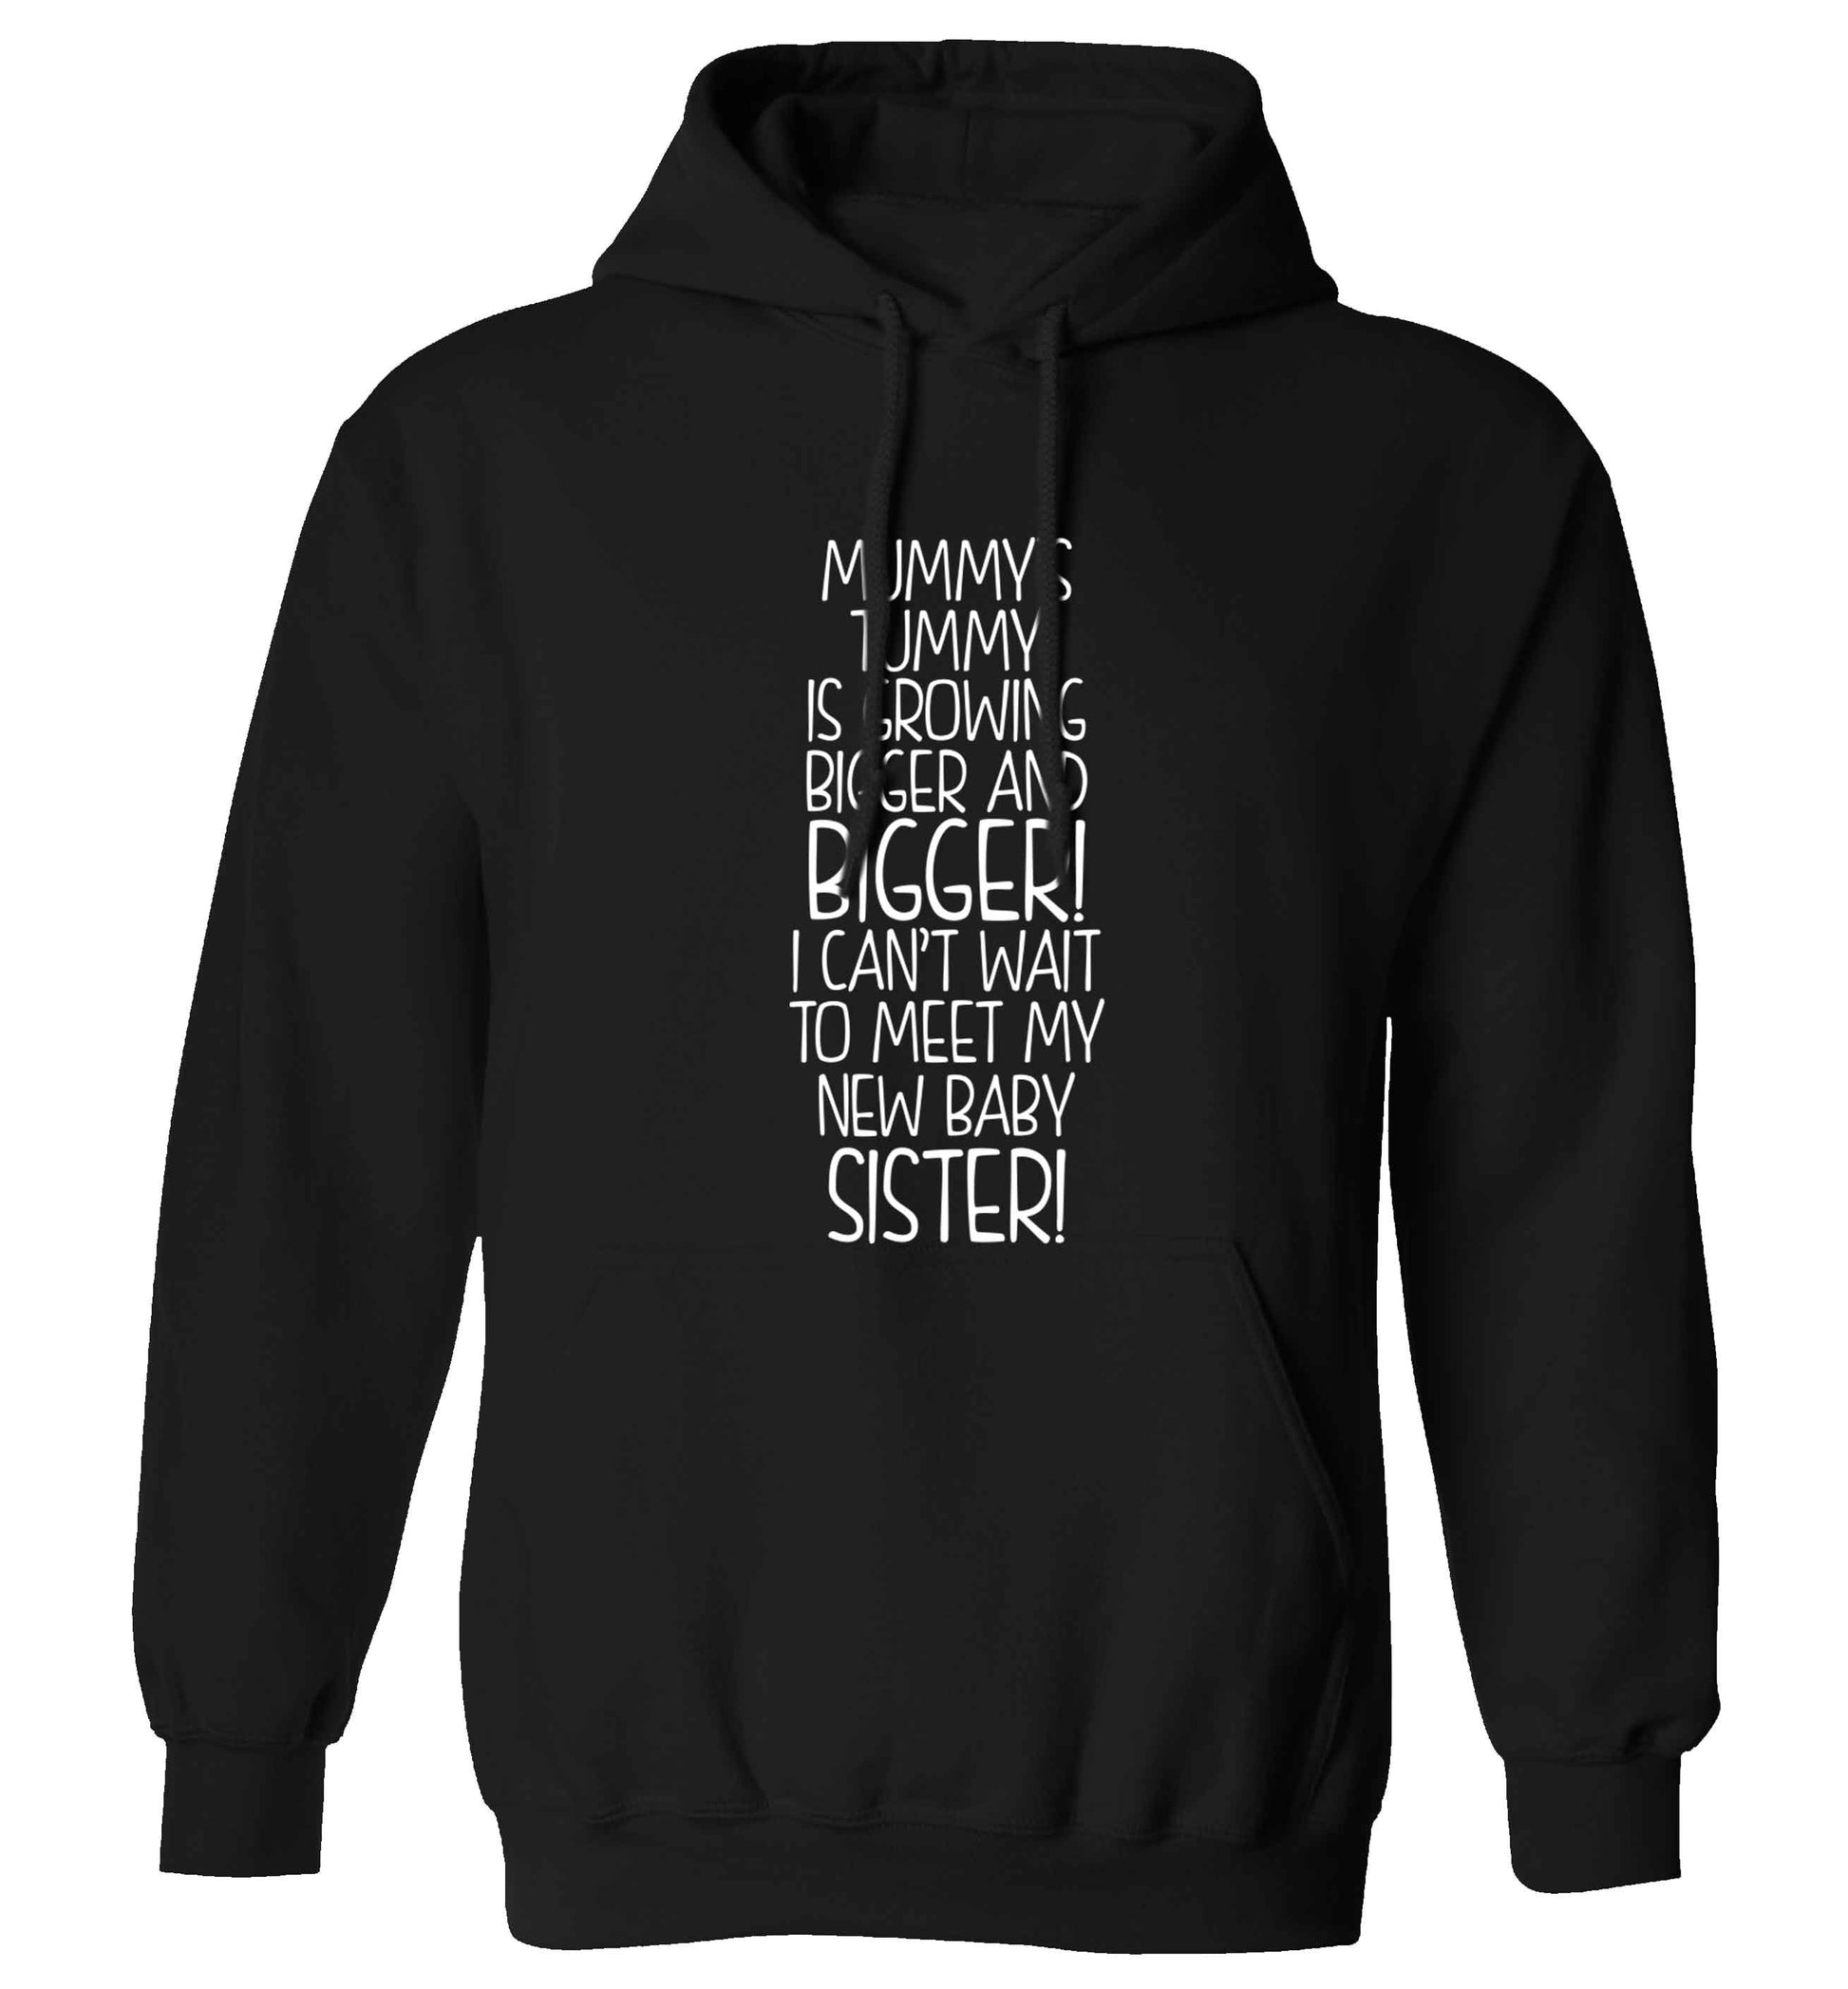 Mummy's tummy is growing bigger and bigger I can't wait to meet my new baby sister! adults unisex black hoodie 2XL